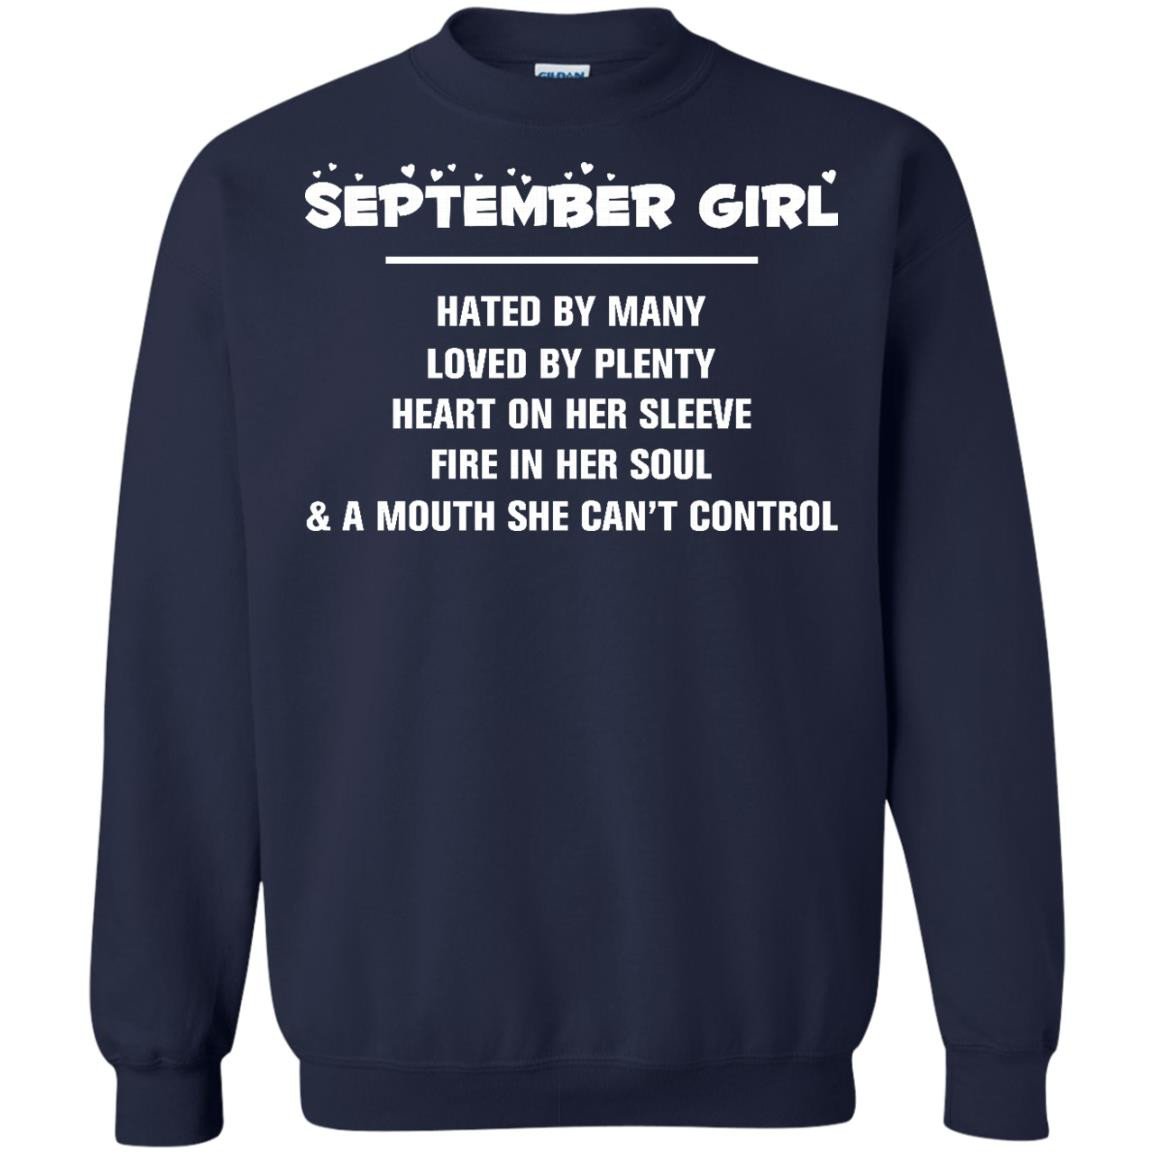 September girl - hated by many - loved by plenty - heart on her sleeve ...